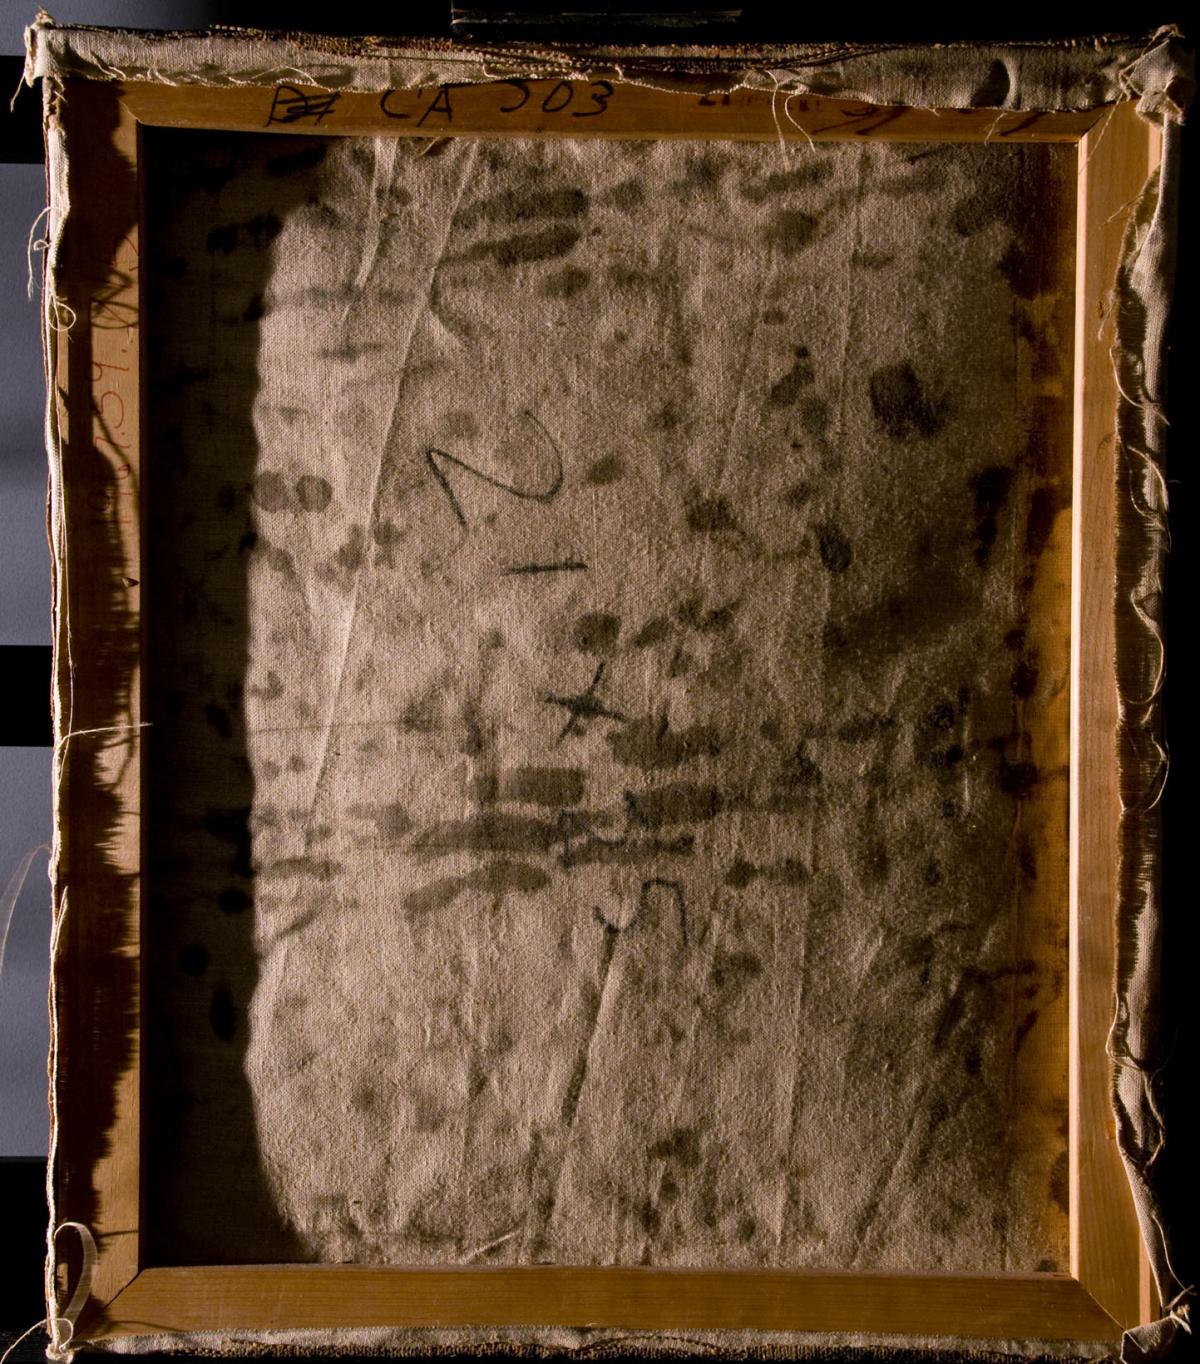 The back of a damaged painting shows staining before conservation